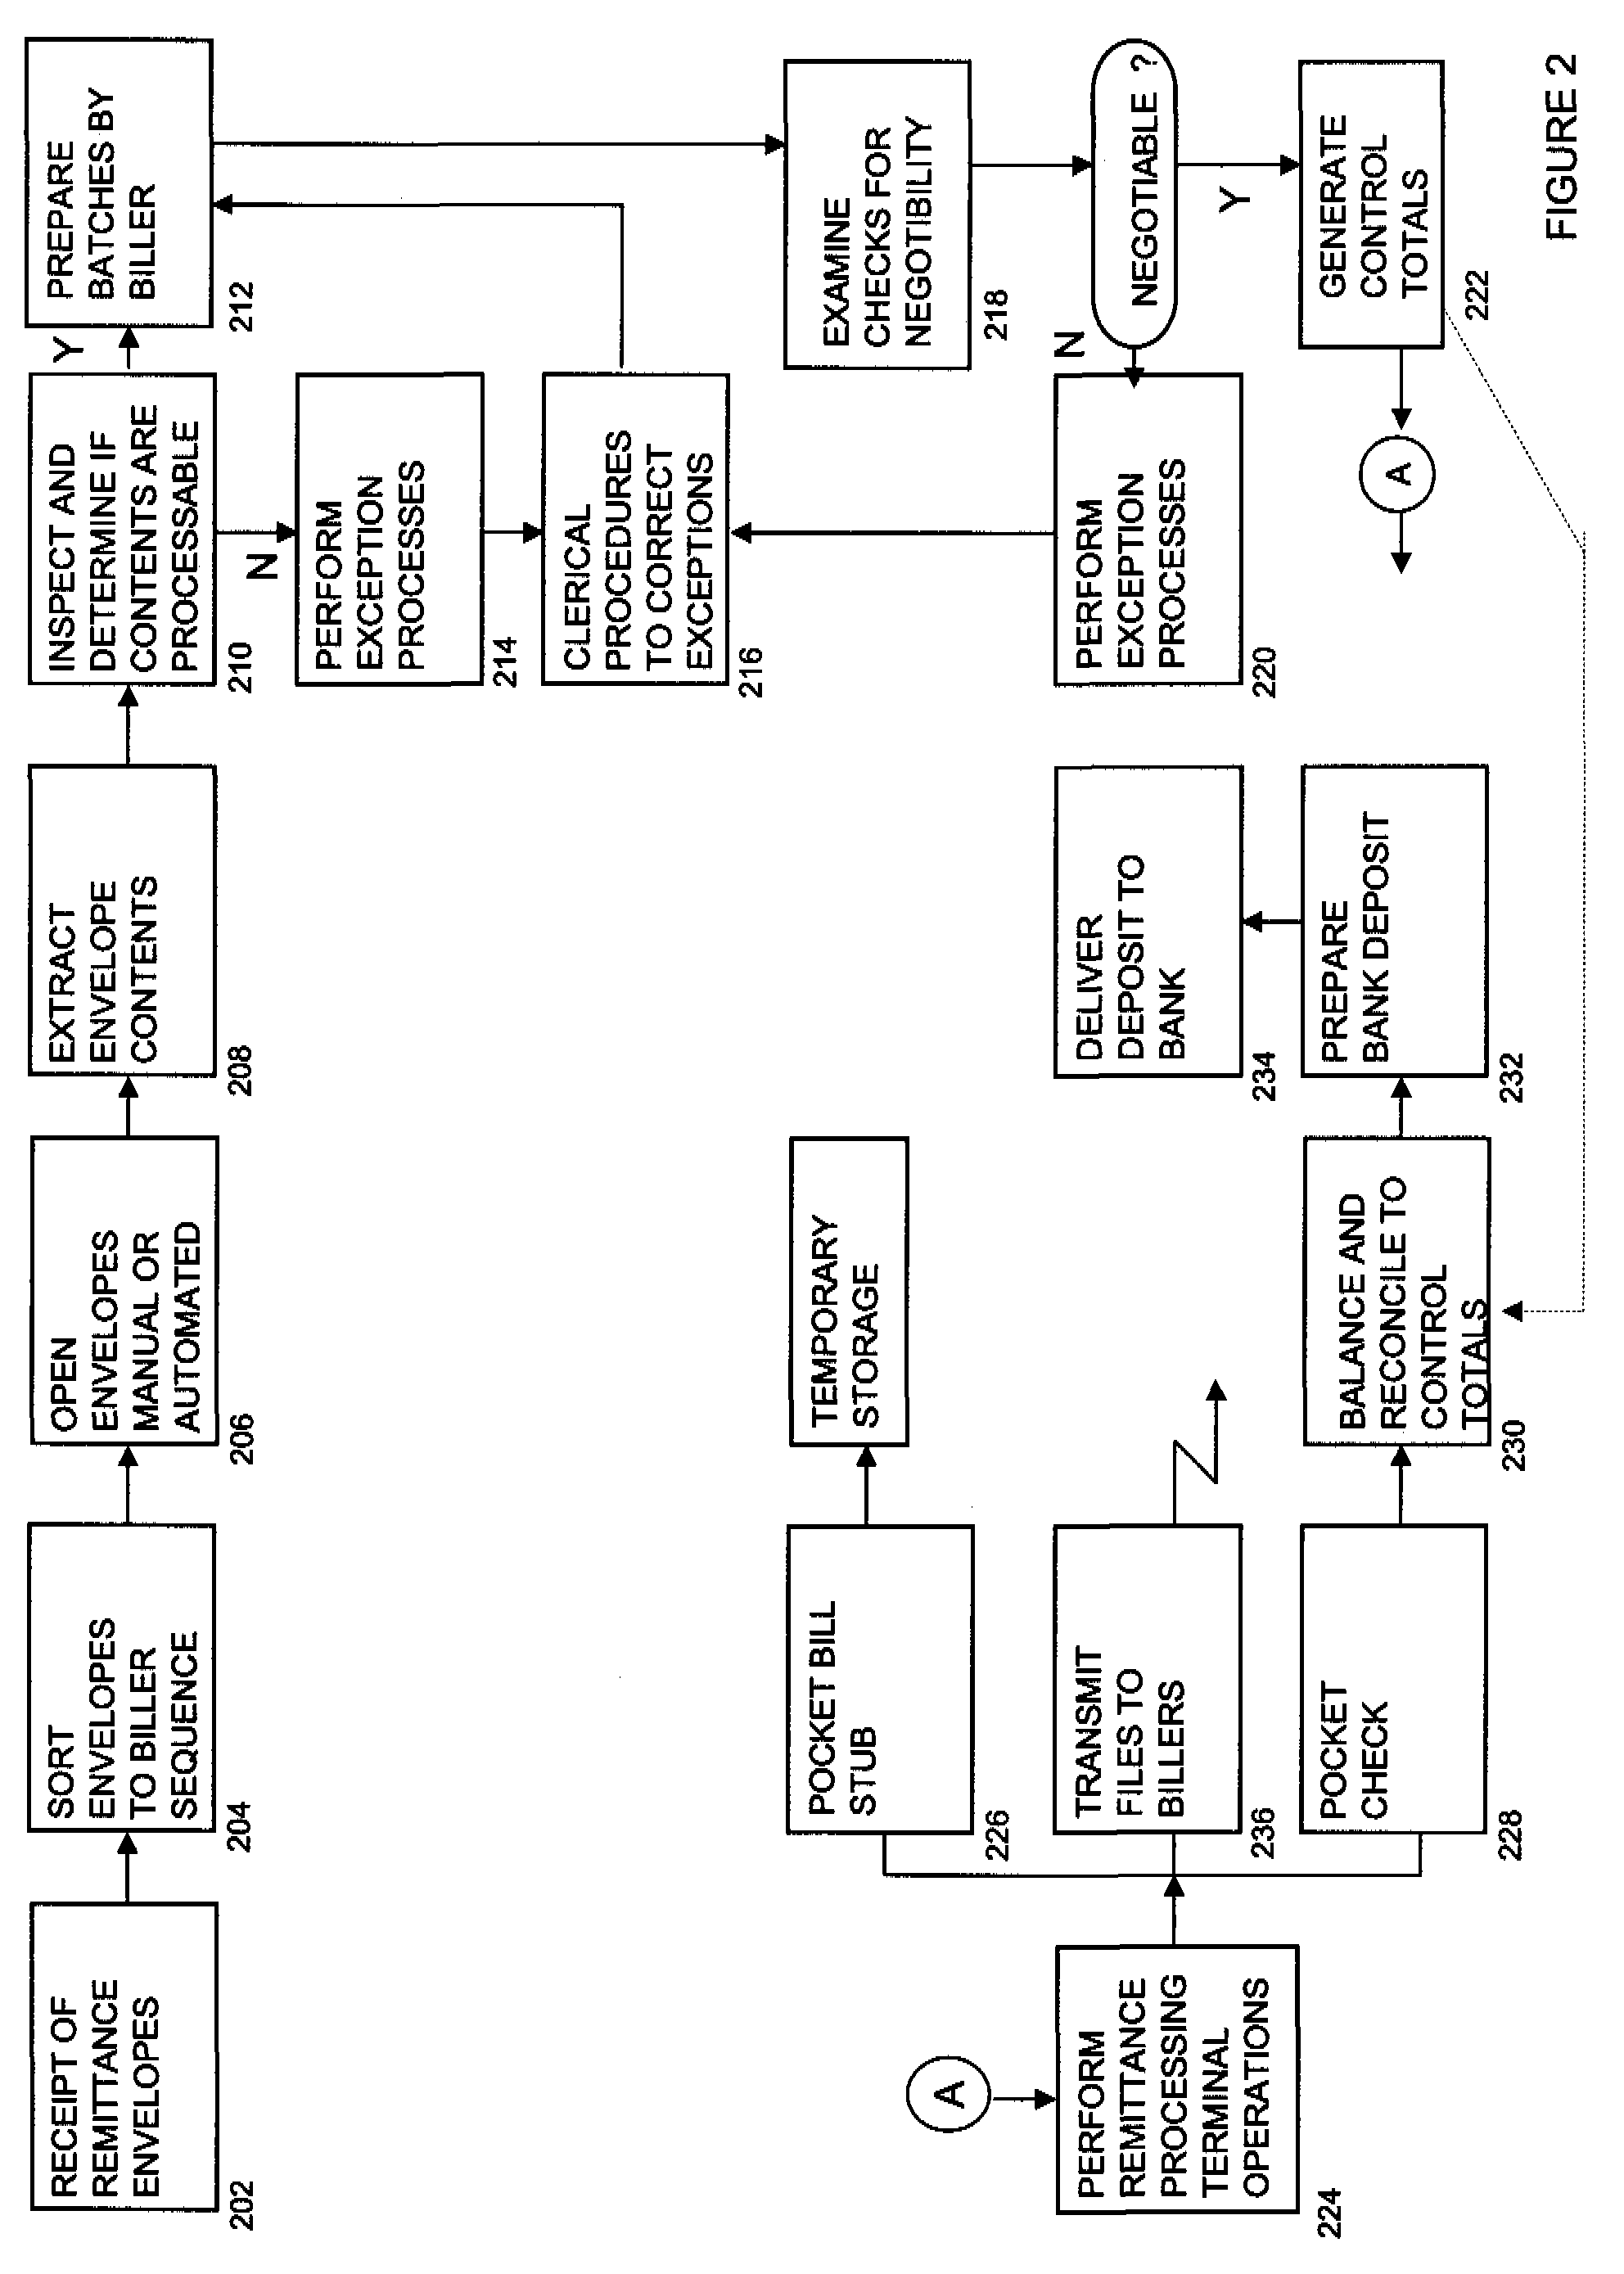 System and Method for Commingled Remittance Payment Processing